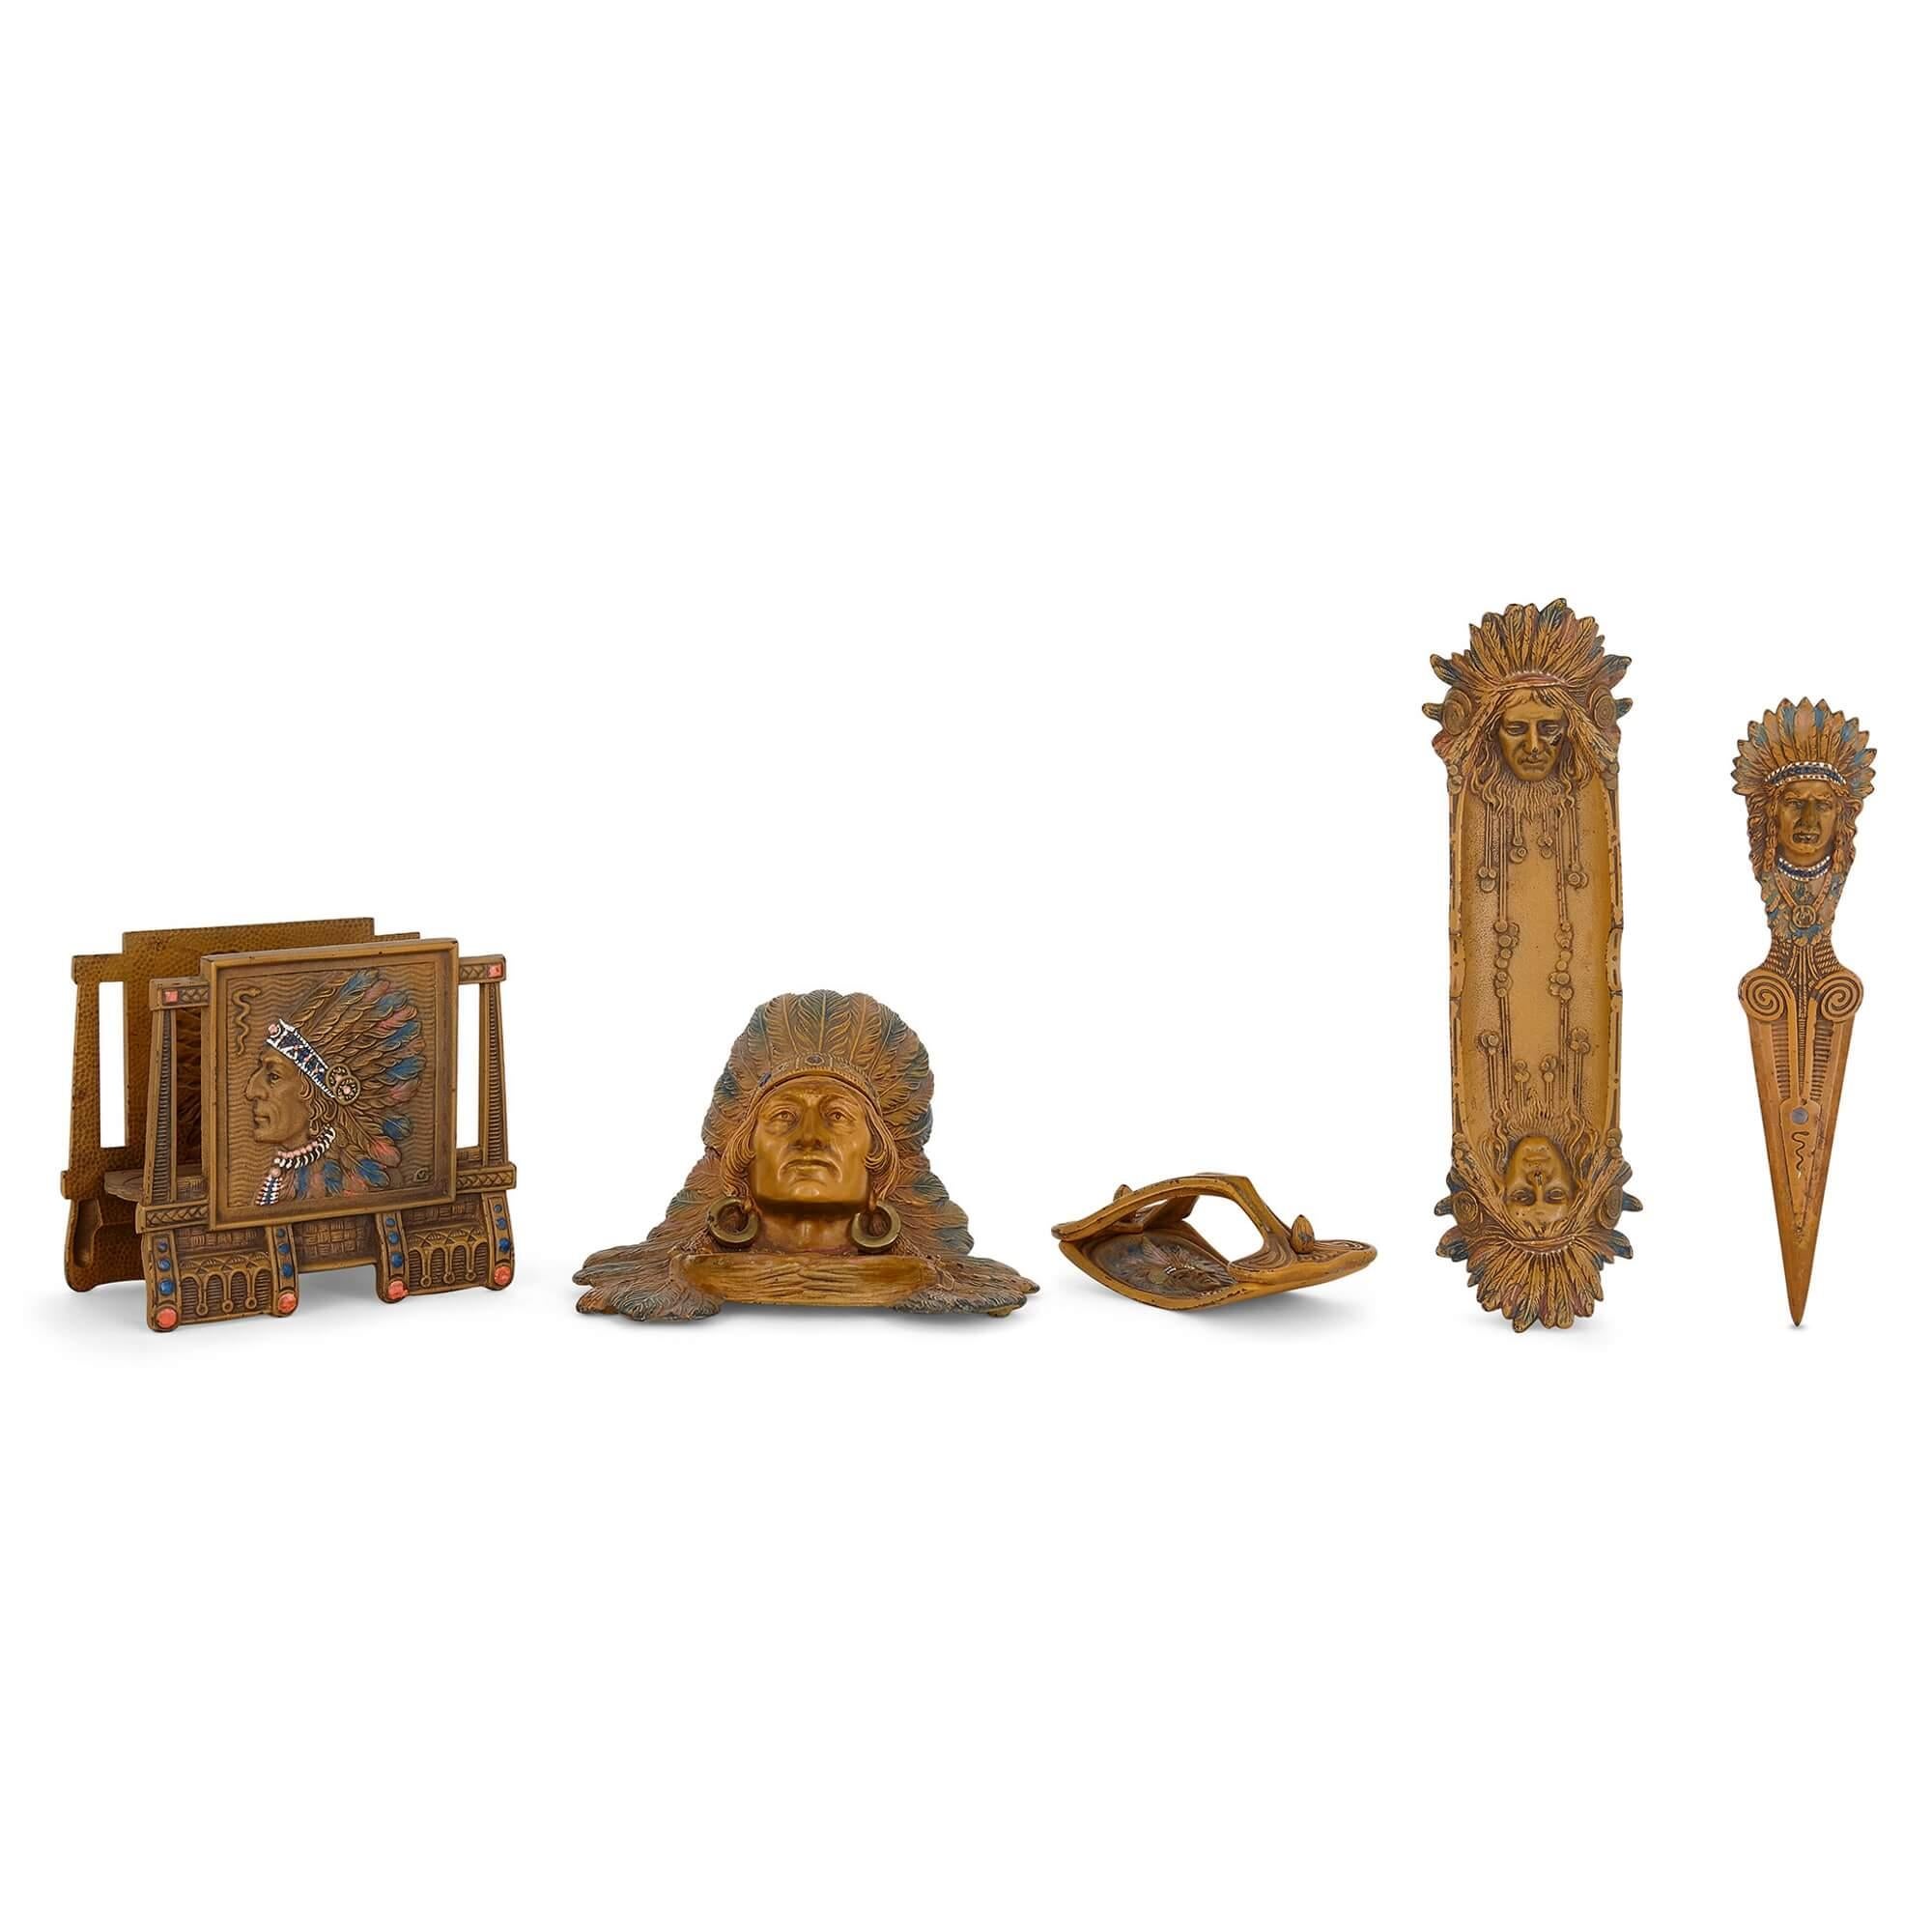 Austrian cold-painted bronze desk set of American interest.
Austrian, c. 1910
Letter holder: height 14.5cm, width 16.5cm, depth 9cm.
Inkstand: height 12cm, width 19cm, depth 17cm

This unusual desk set is crafted from cold-painted bronze in the